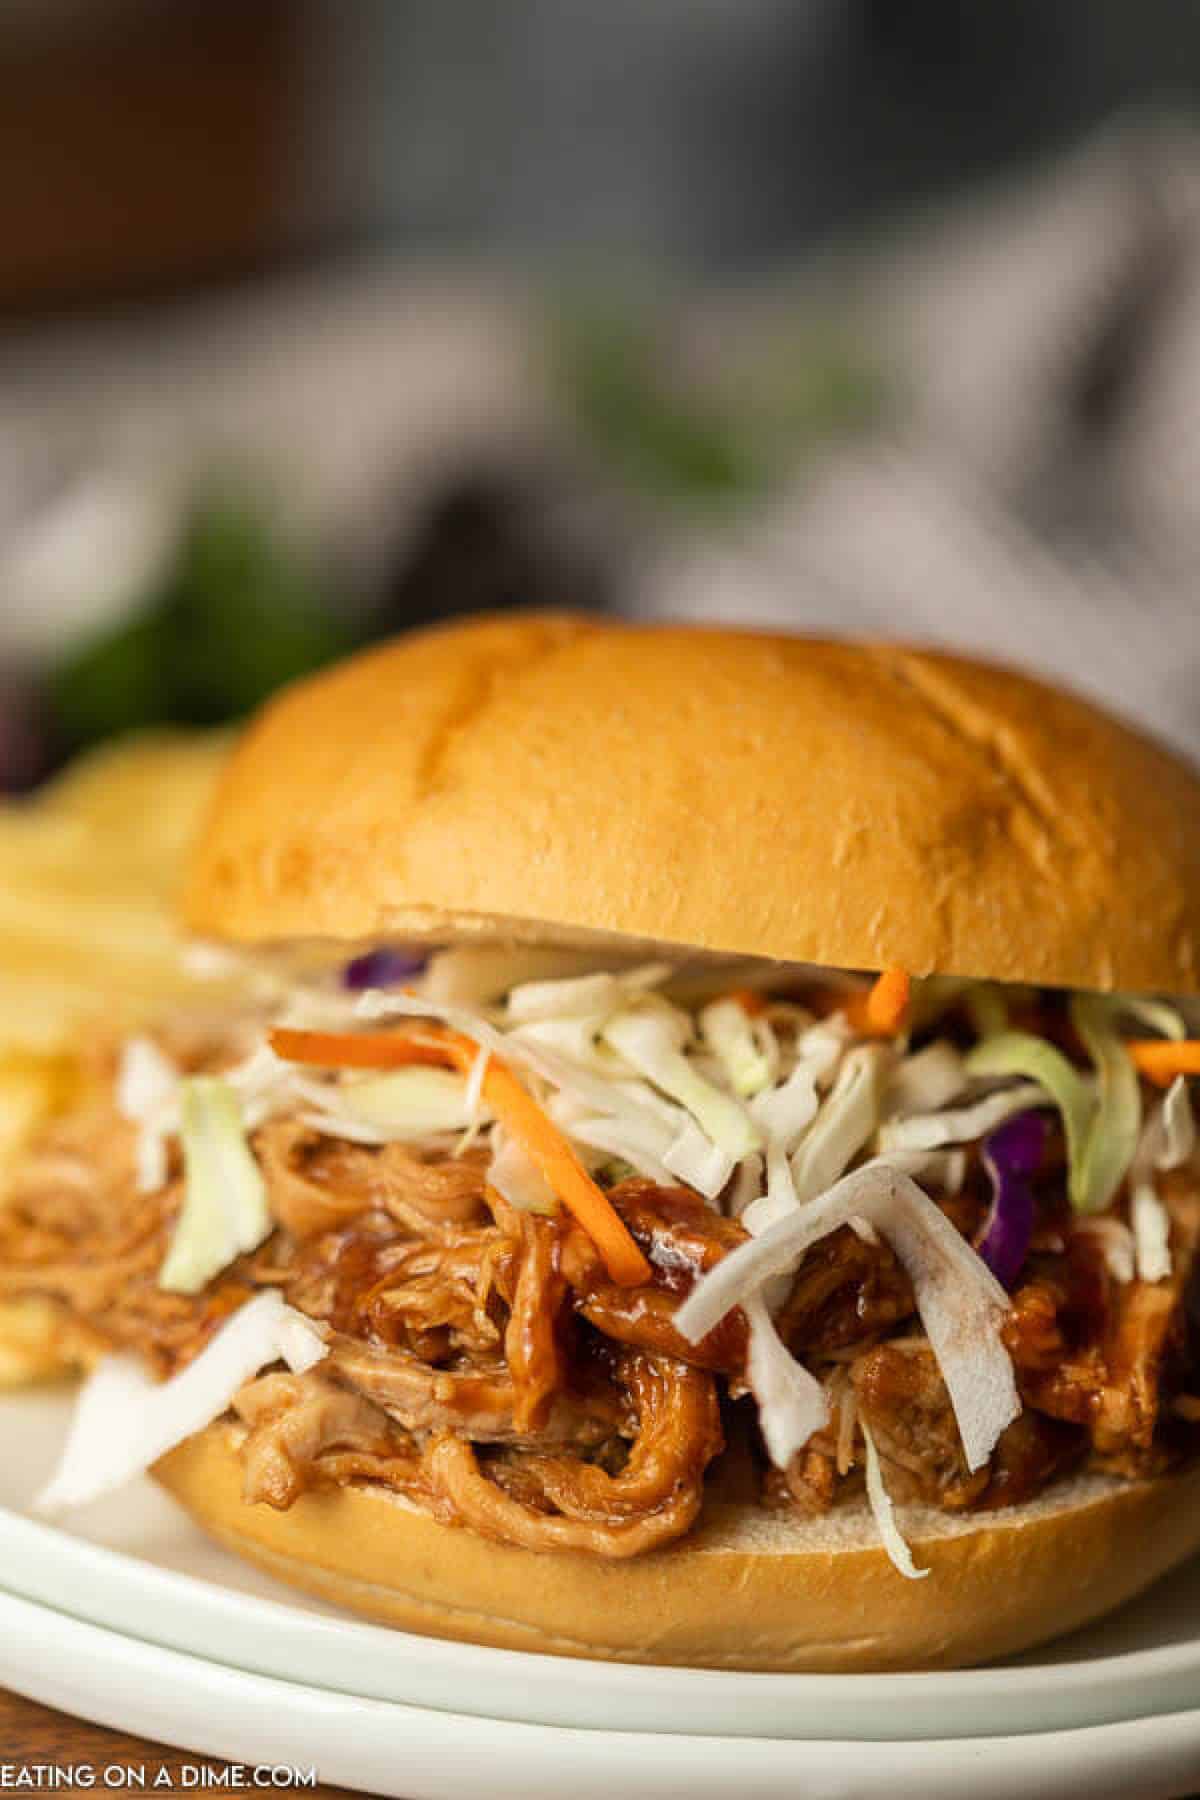 Pulled pork sandwich topped with slaw on a plate